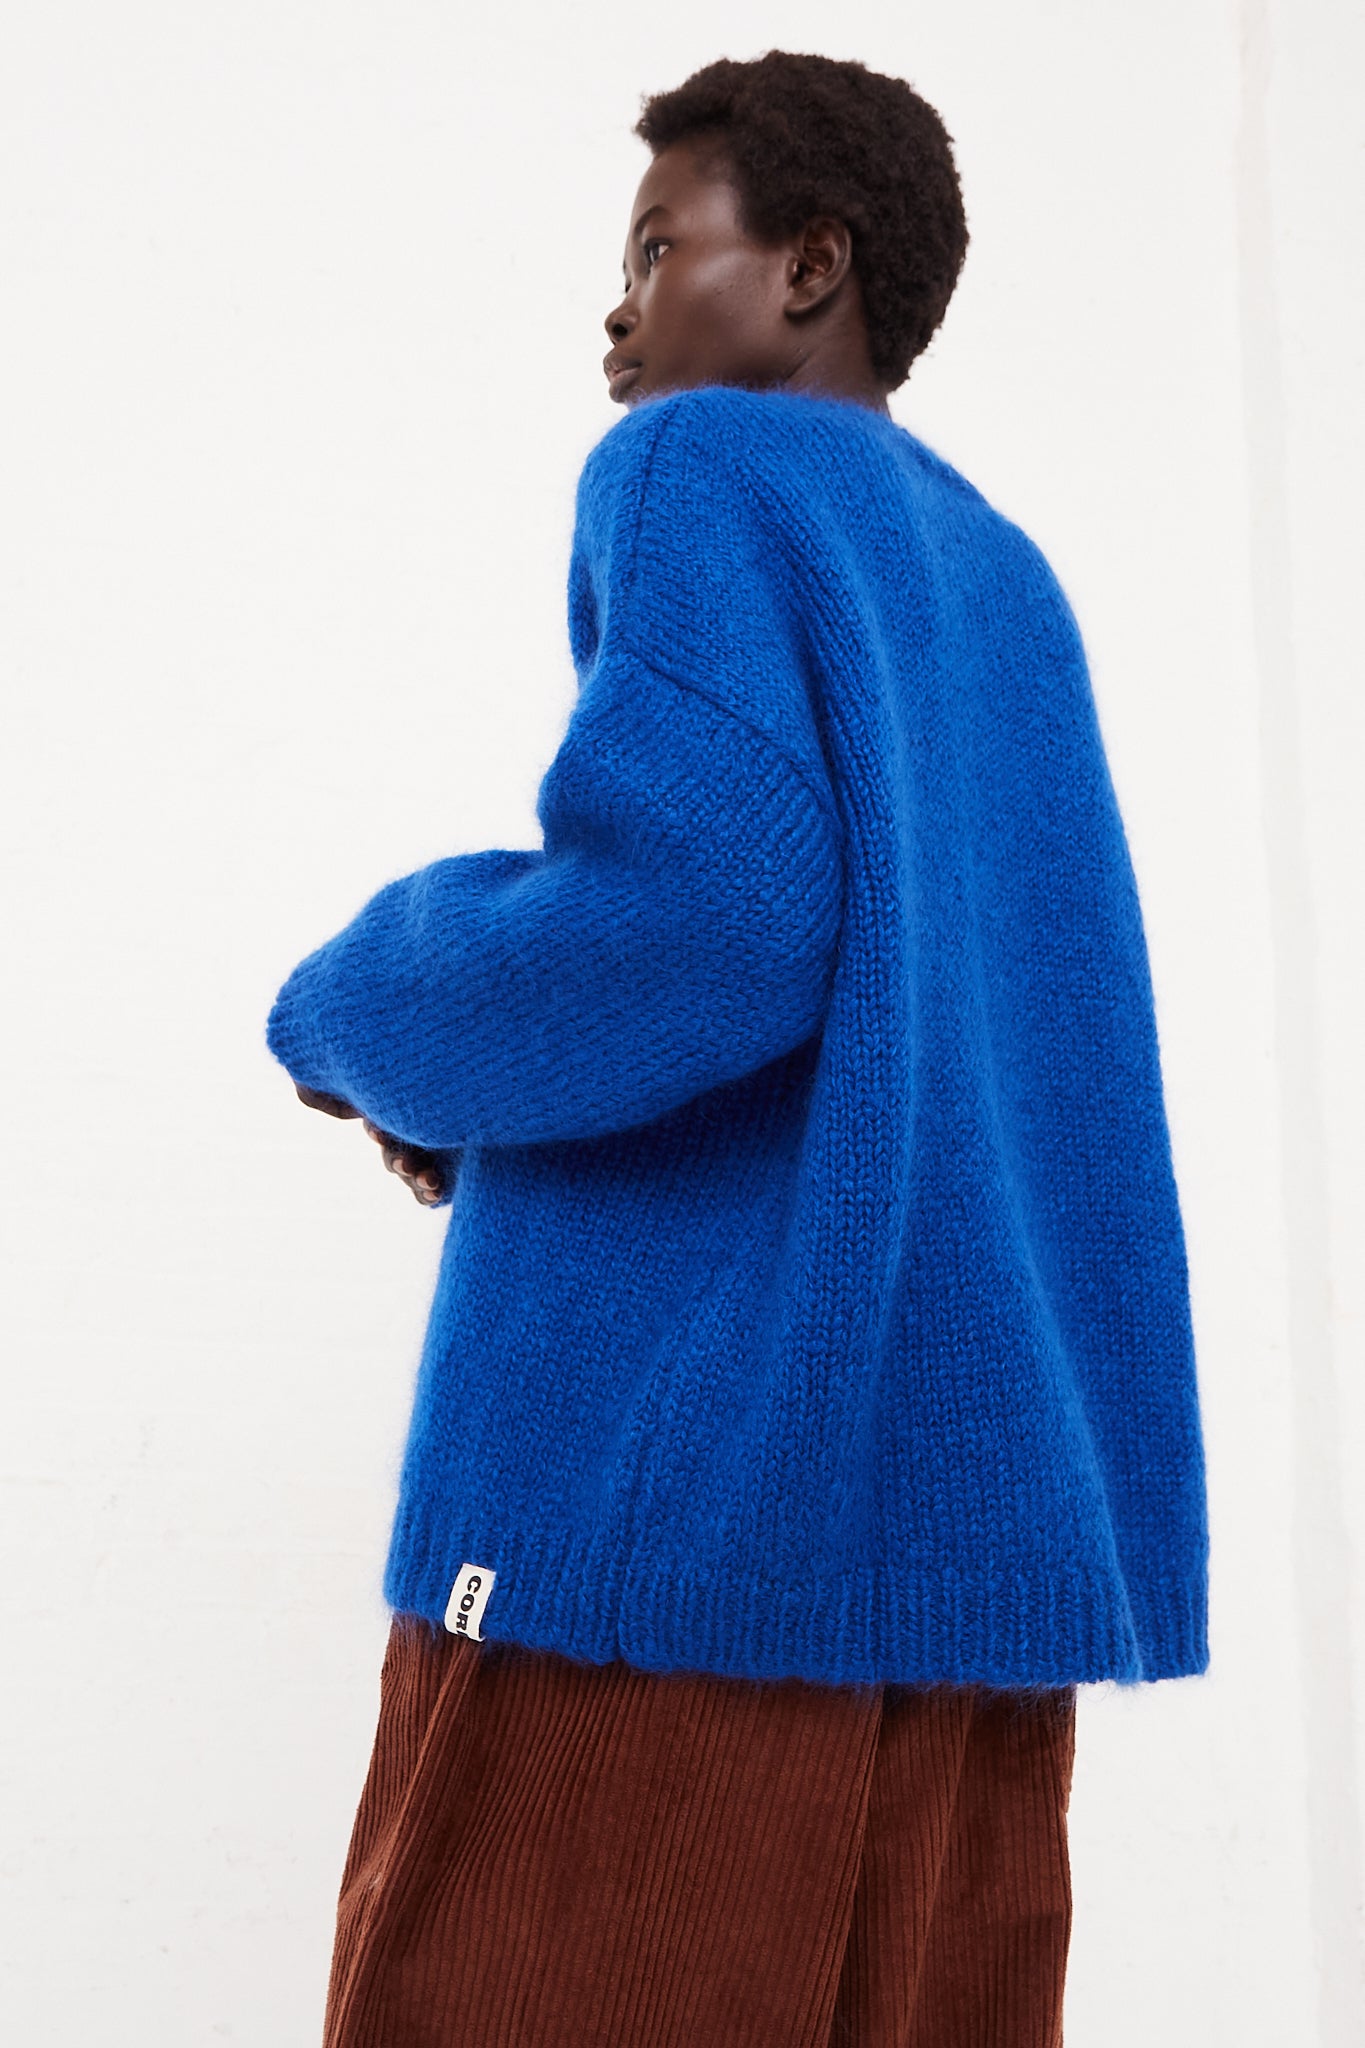 CORDERA Mohair Sweater in Blue | Oroboro Store | Side view of sweater upclose on model